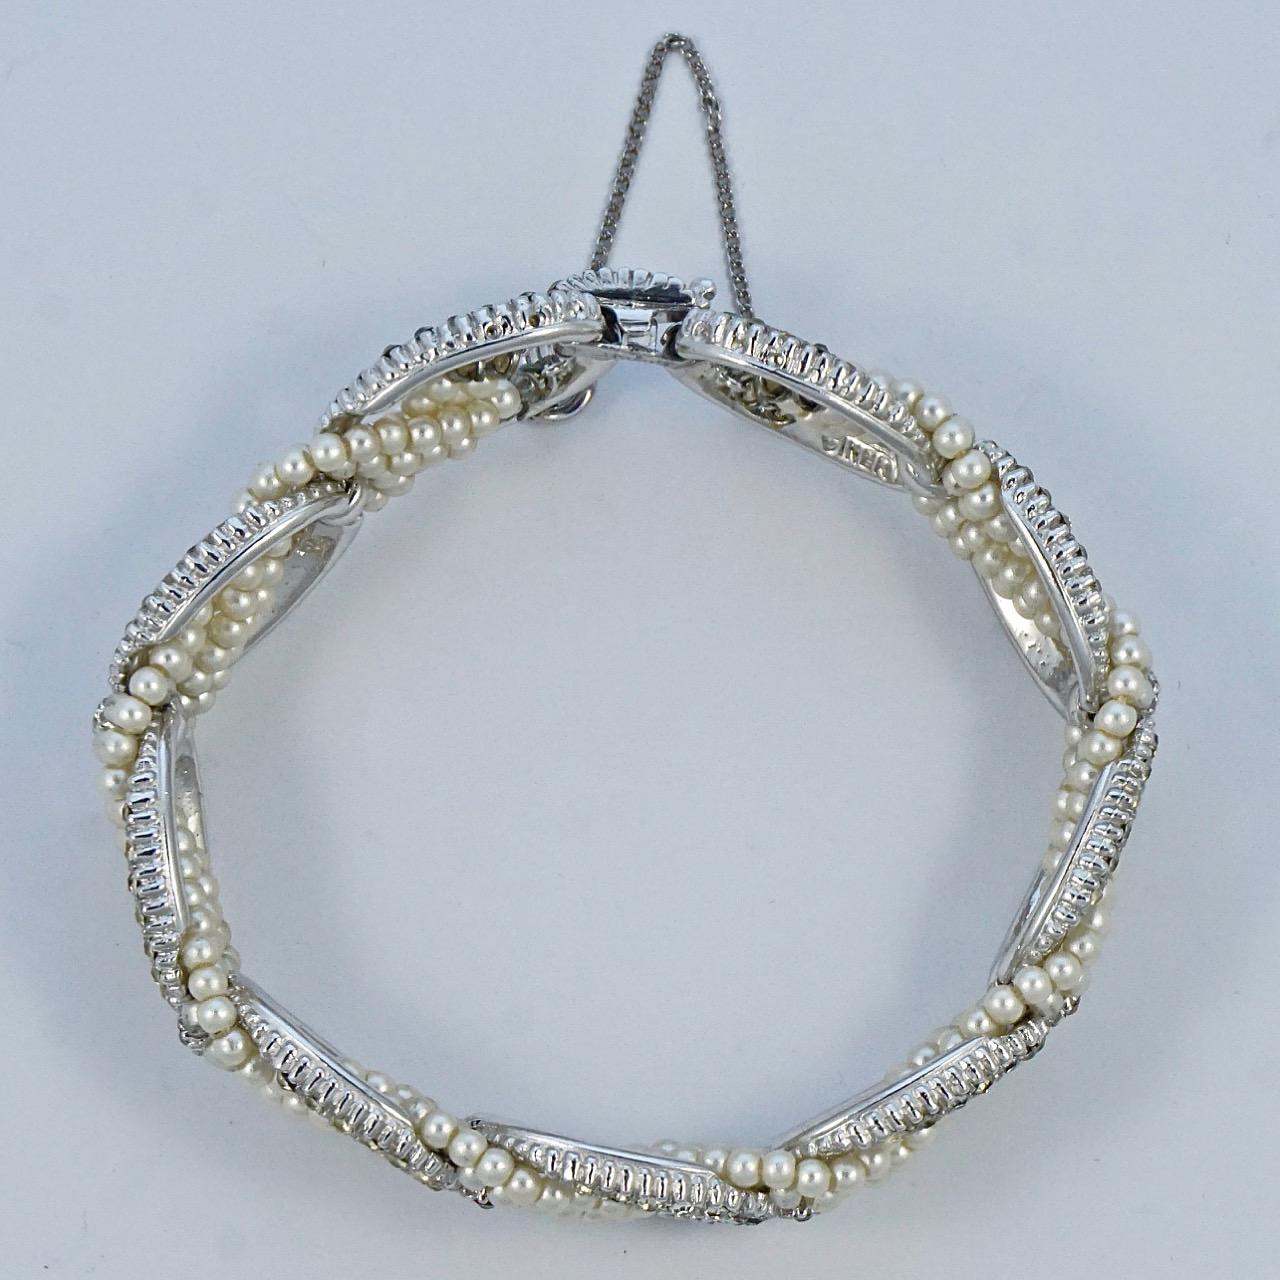 Ciner Silver Plated Faux Pearl and Rhinestone Link Bracelet with Safety Chain In Good Condition For Sale In London, GB